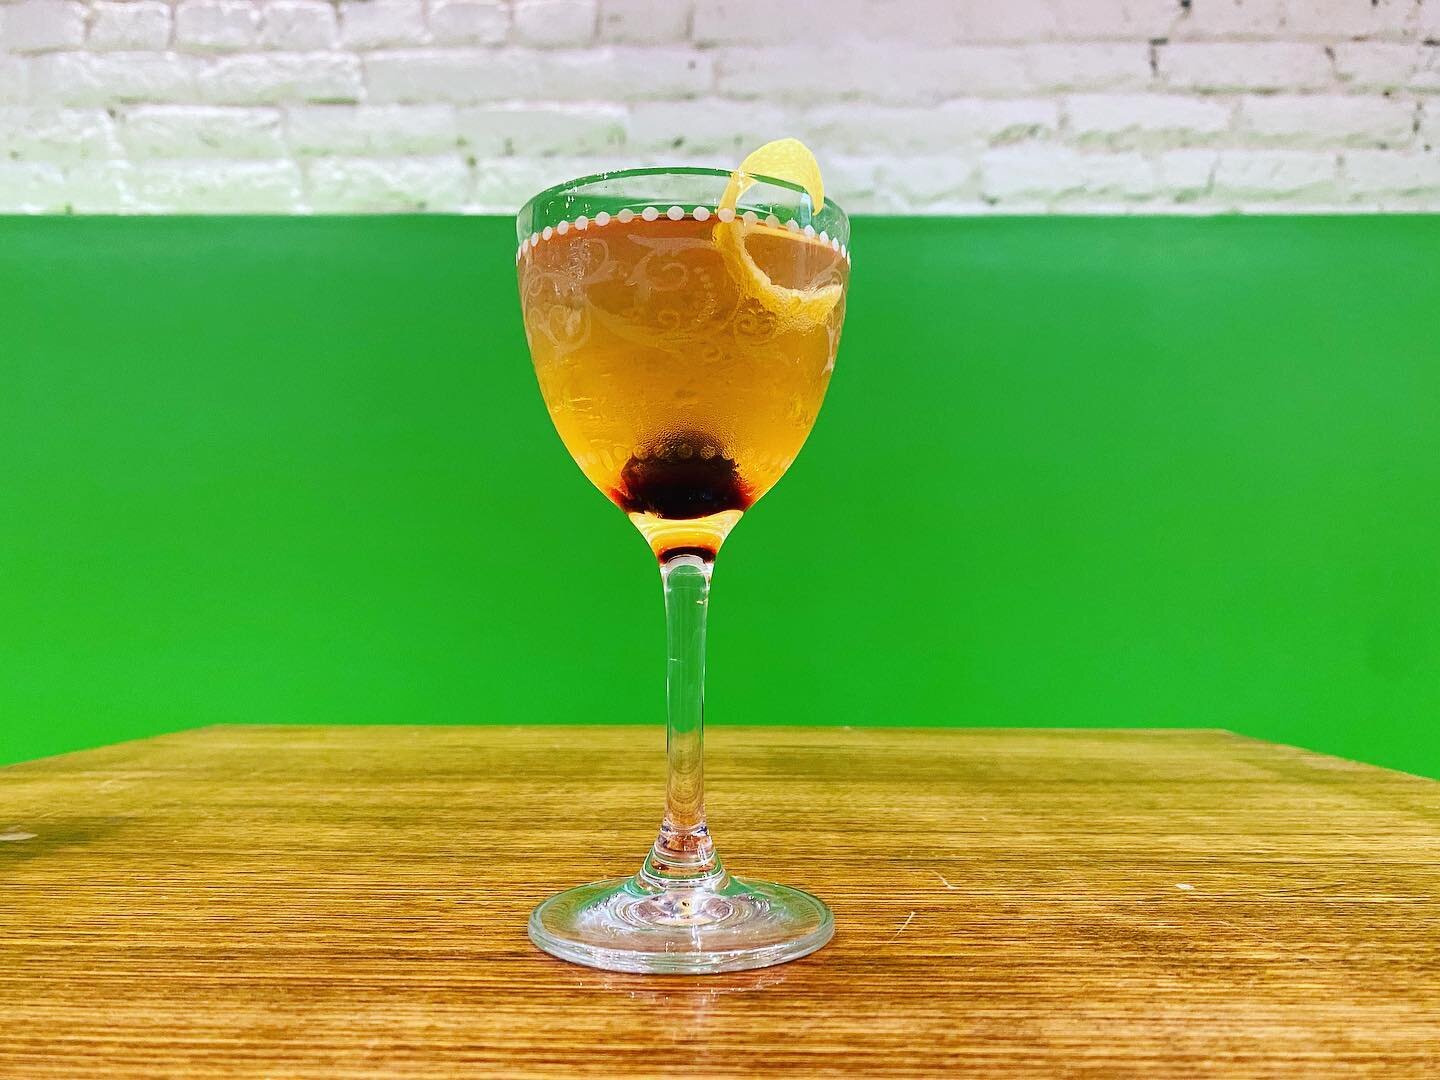 It&rsquo;s #friday y&rsquo;all. Who&rsquo;s thirsty? Check out our friends @crazyaunthelens entirely #locallymade #cocktail menu where there&rsquo;s something for everyone, like this little beaut: Barracks Row Sipper @capitoline_dc white #vermouth @c